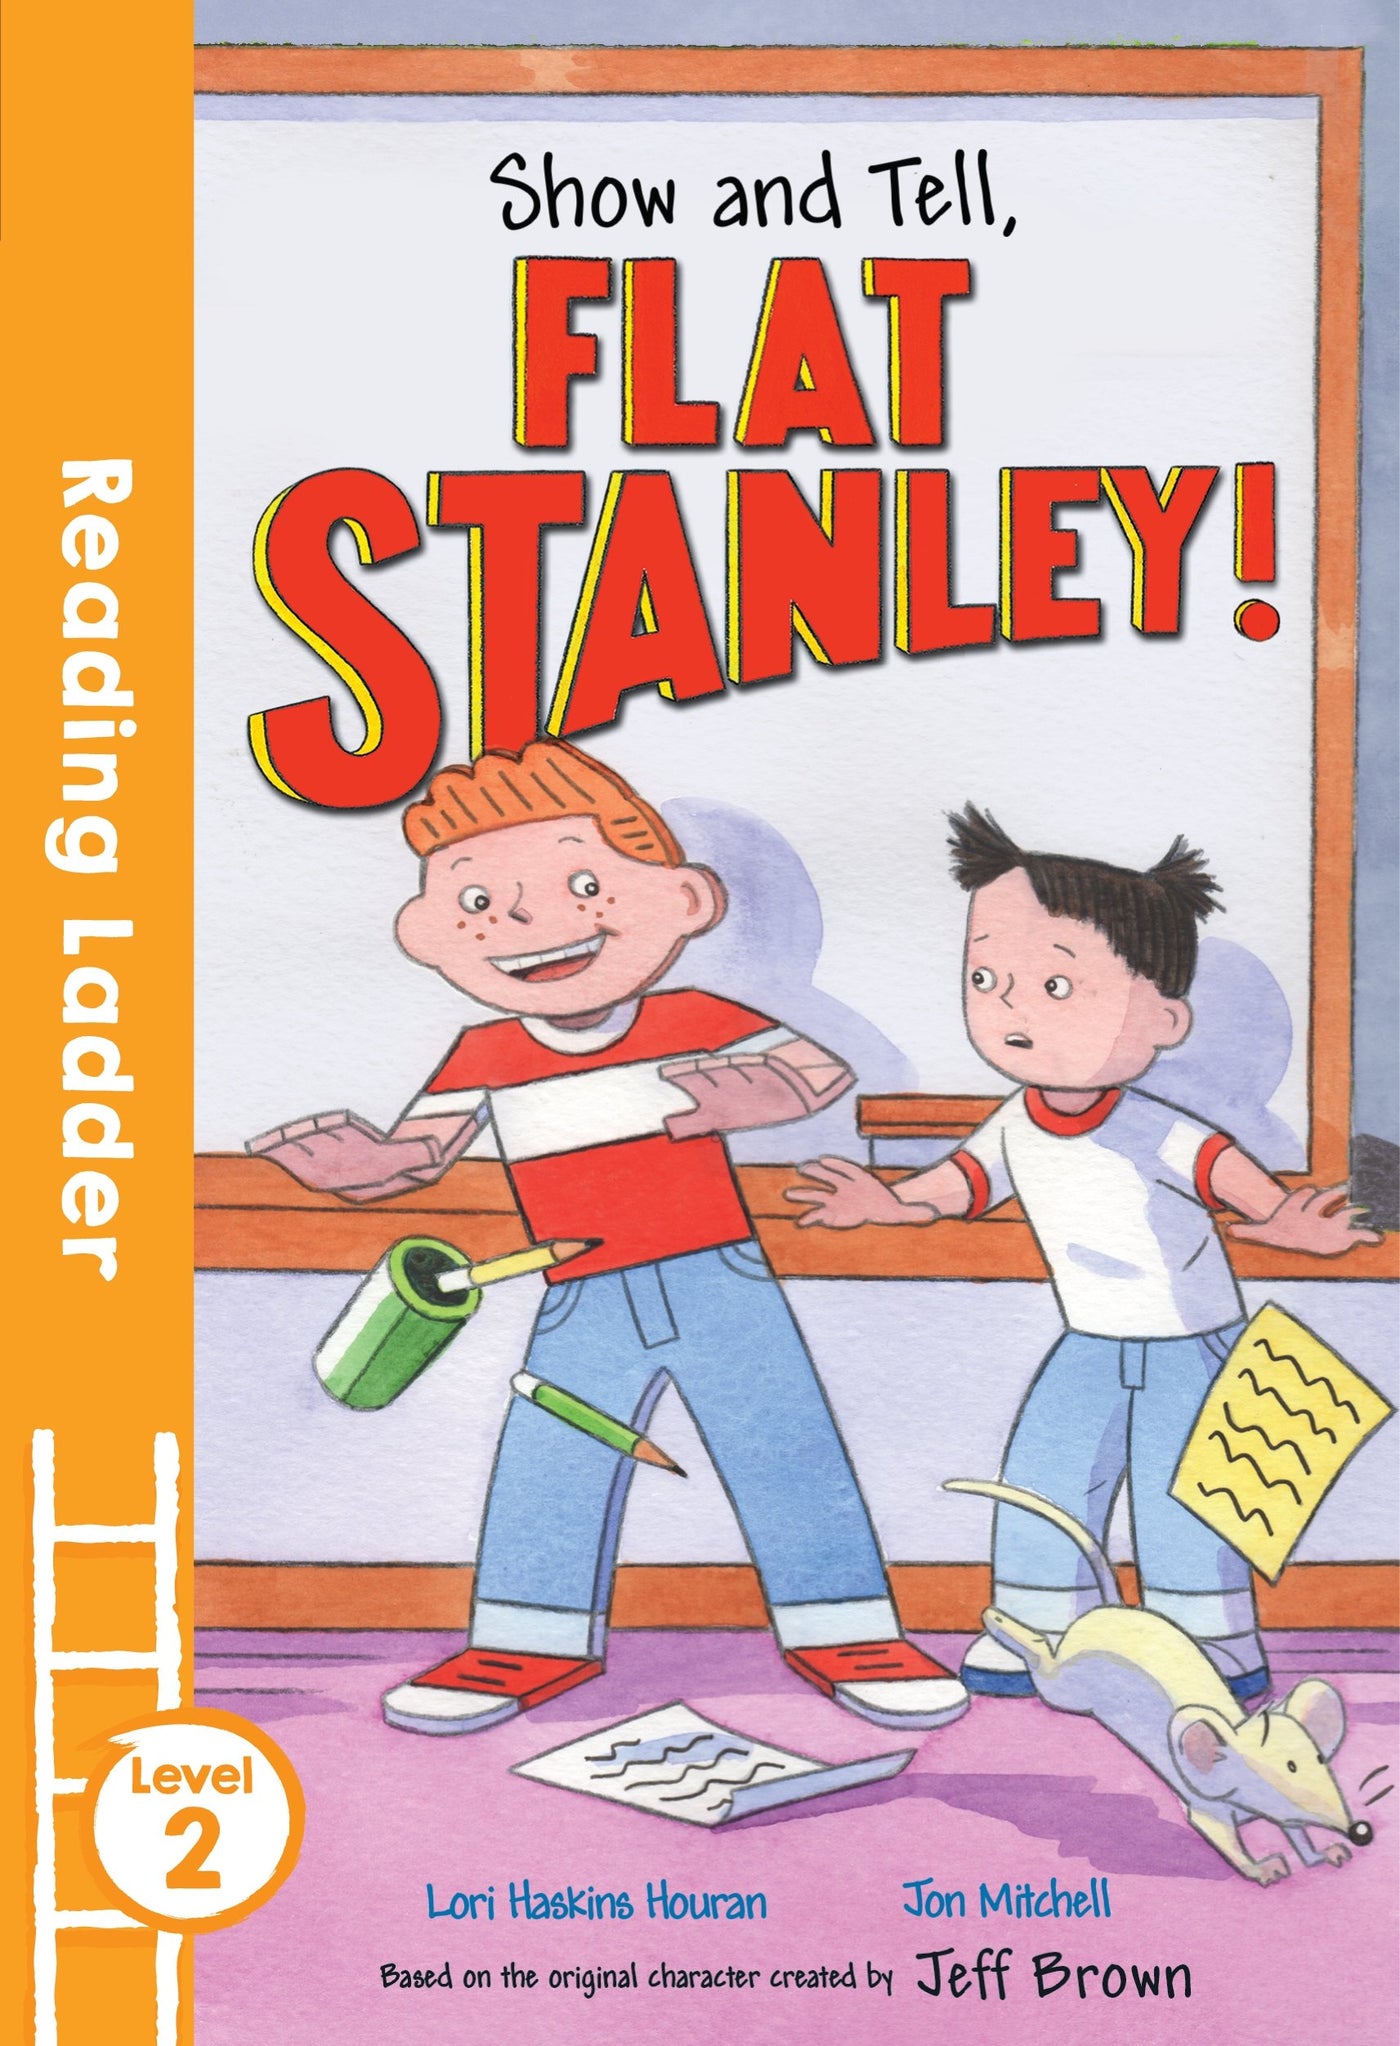 Show and Tell Flat Stanley! (Reading Ladder Level 2)